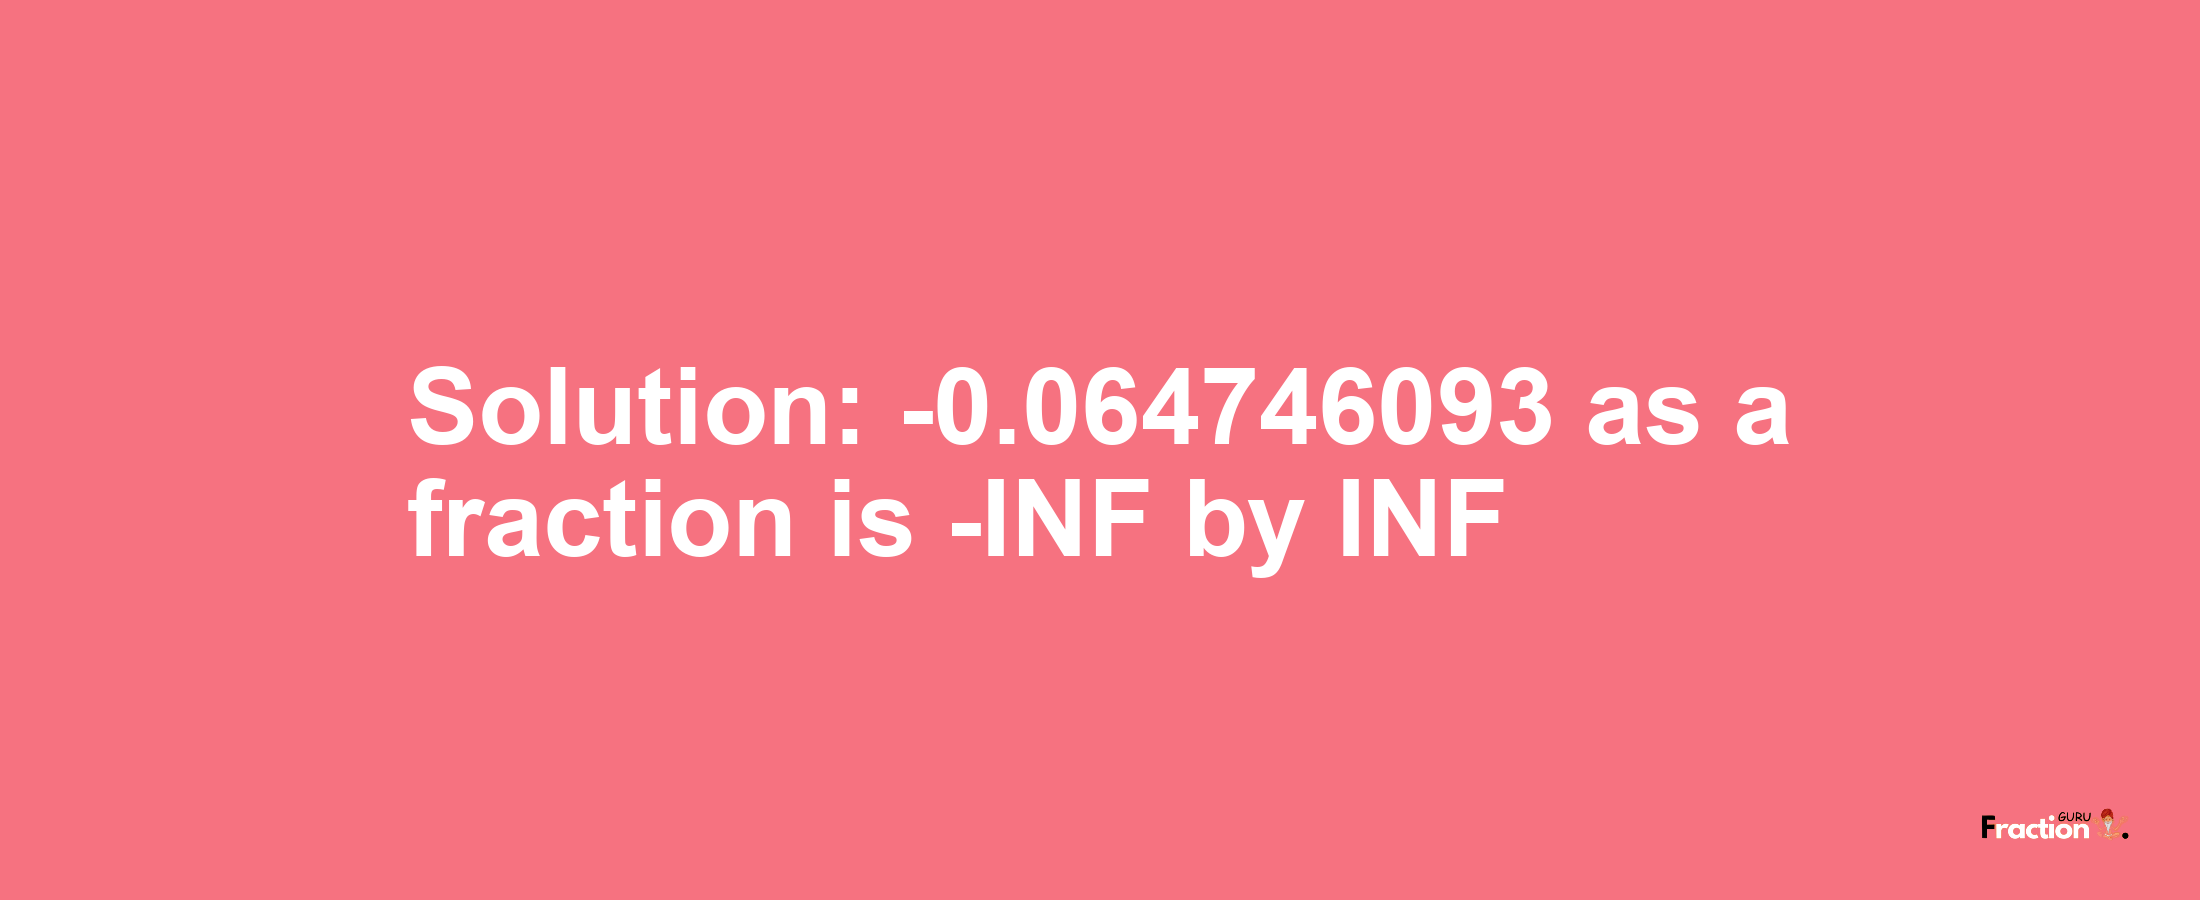 Solution:-0.064746093 as a fraction is -INF/INF